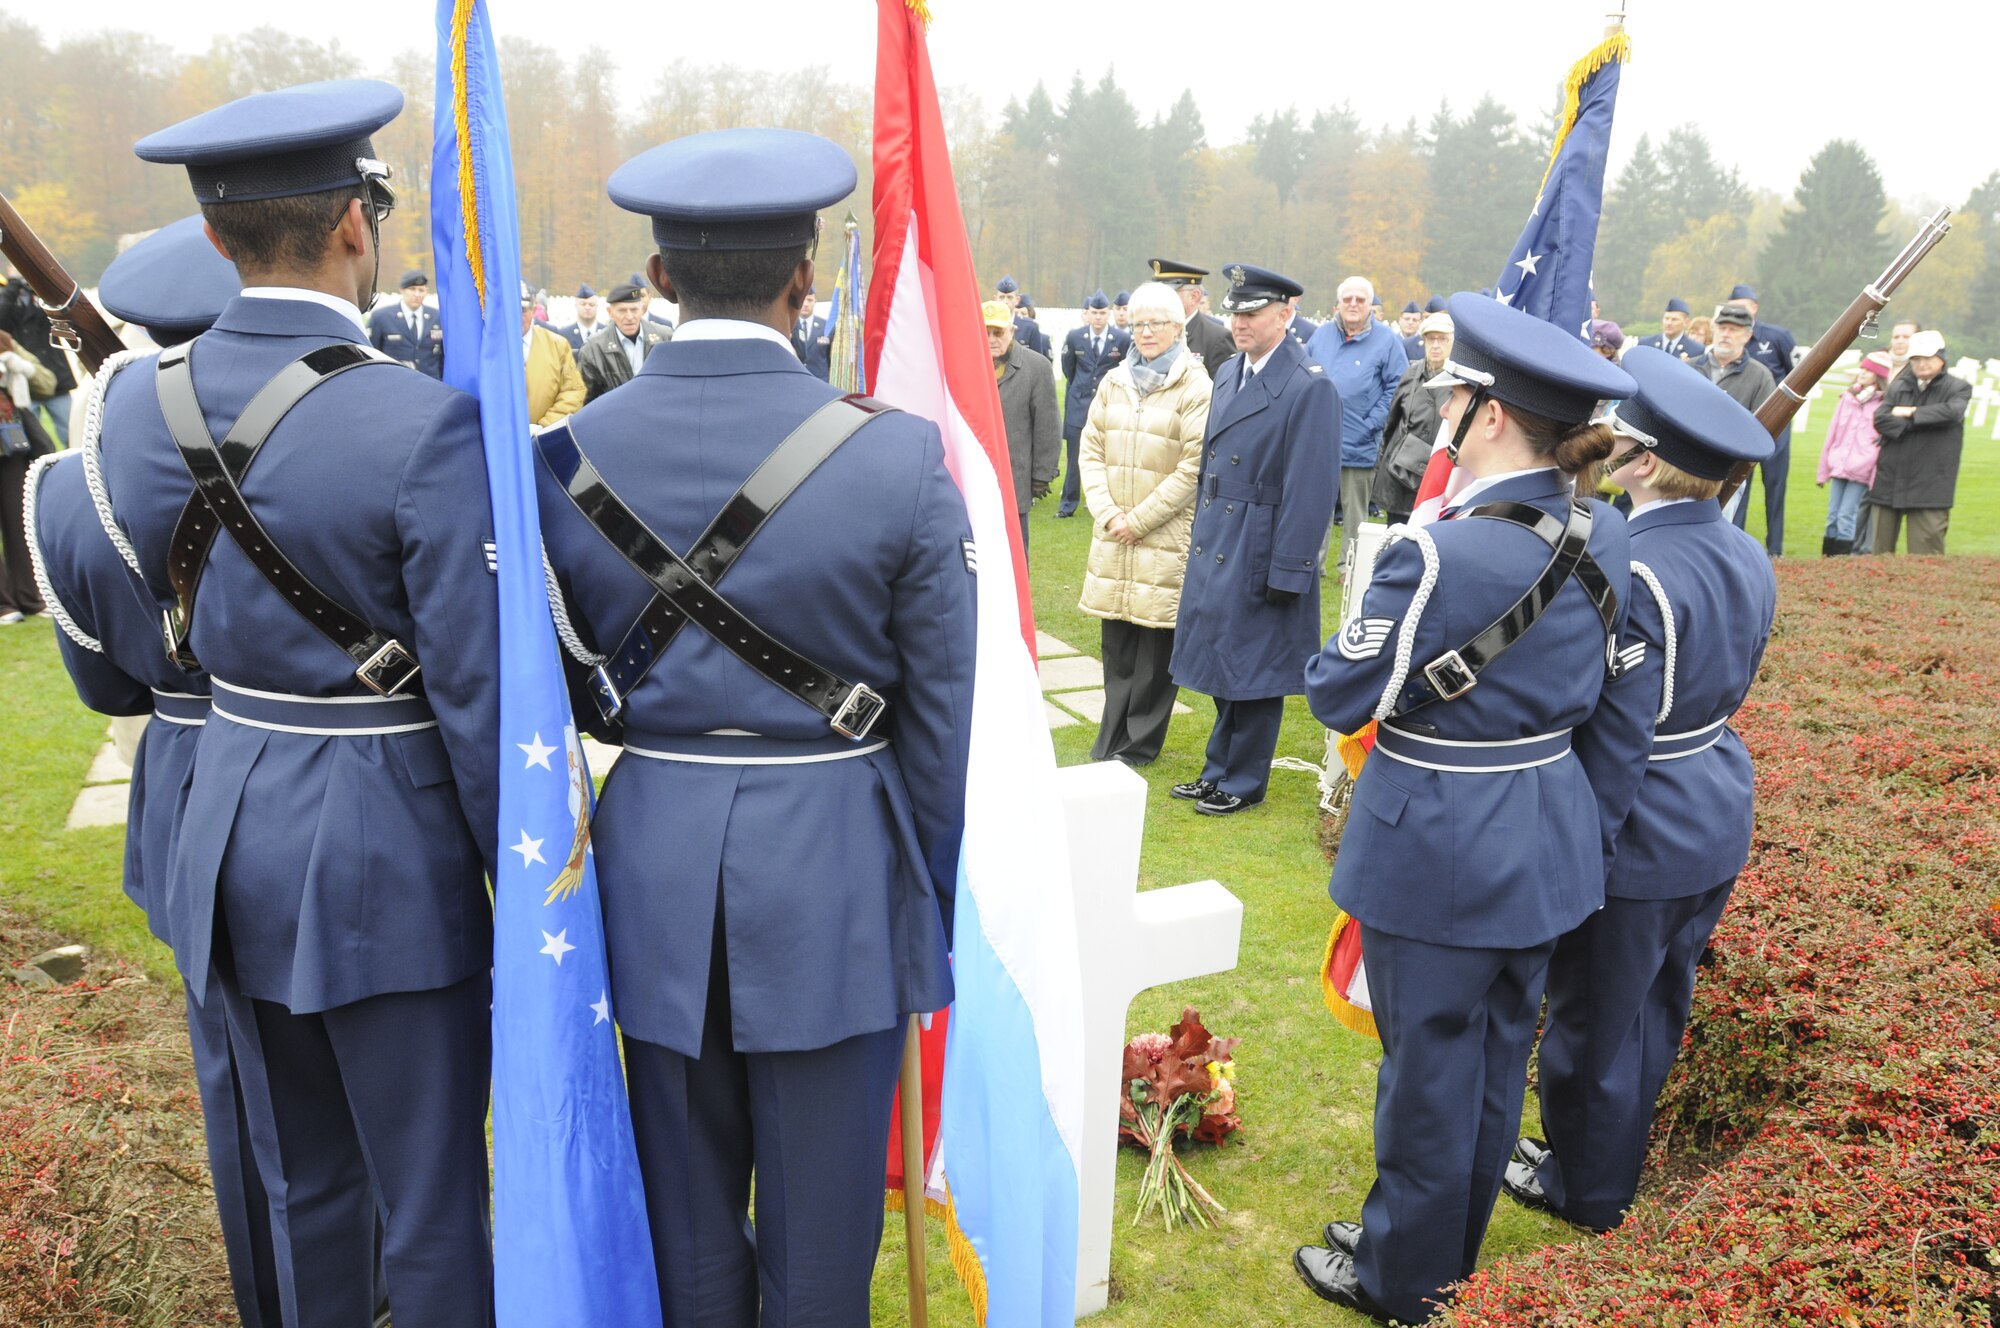 SPANGDAHLEM AIR BASE, Germany -- The 702nd Munitions Support Squadron Color Guard from Buechel Air Base, Germany, stands at attention by the grave of Gen. George Smith Patton, Third Army commander during World War II, as Helen Patton-Plusczyk, General Patton's granddaughter, and Col. Tip Wight, 52nd Fighter Wing commander, pay their respect to the soldiers who died fighting in World War II during the annual Veterans Day ceremony at the Luxembourg American Cemetery and Memorial in Luxembourg City Nov. 11. The 50.5 acre cemetery is one of 14 American cemeteries established overseas after WWII and contains the remains of more than 5,000 American servicemembers who died fighting the second world war. (U.S. Air Force photo/Maj. Jillian Torango)